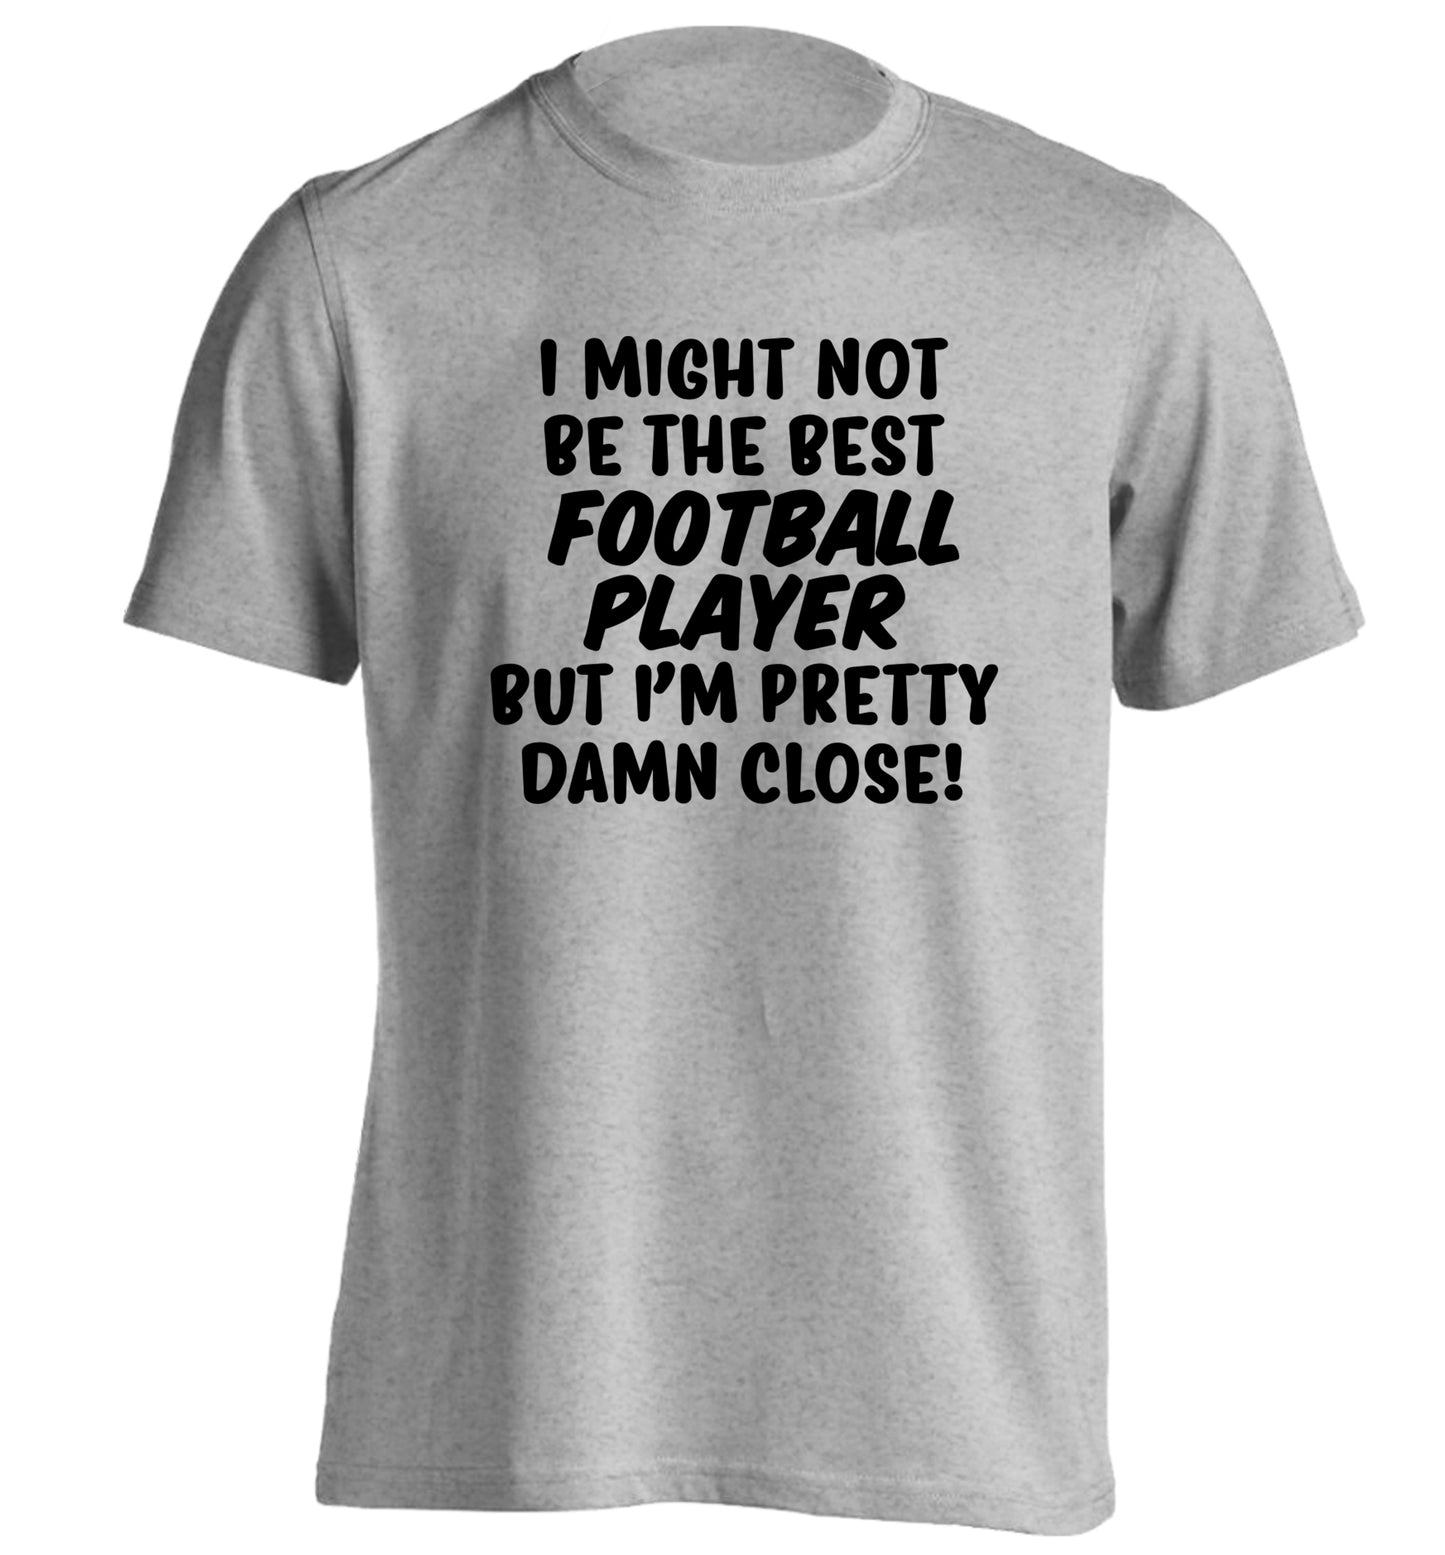 I might not be the best football player but I'm pretty close! adults unisexgrey Tshirt 2XL